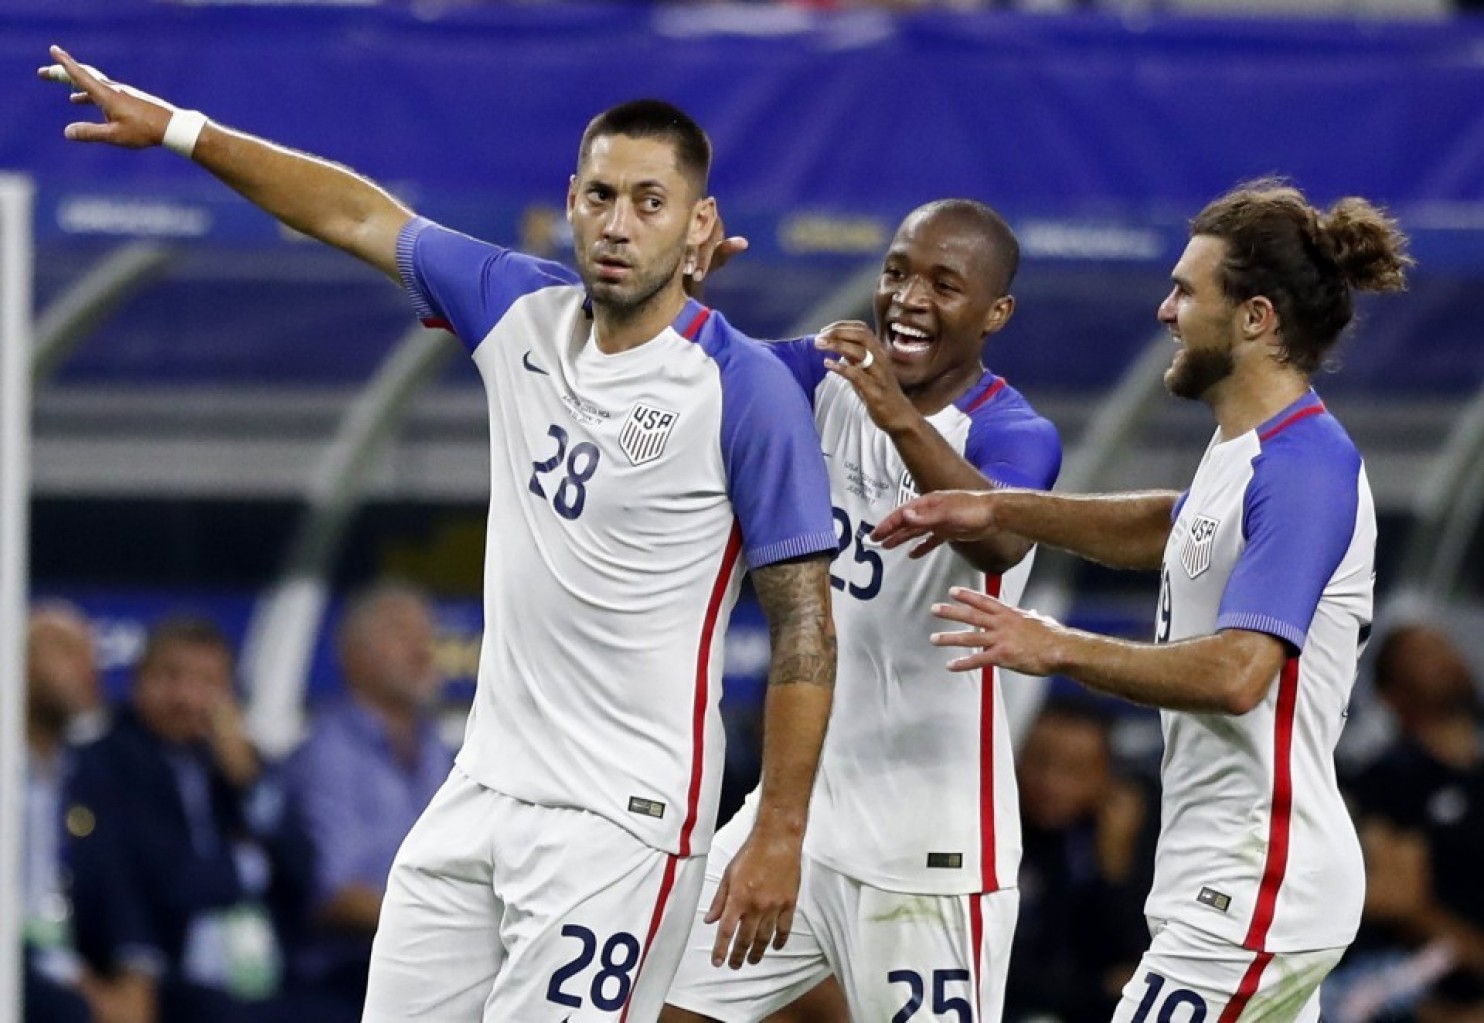 Dempsey Scores Landmark Goal to take United States into Gold Cup Final